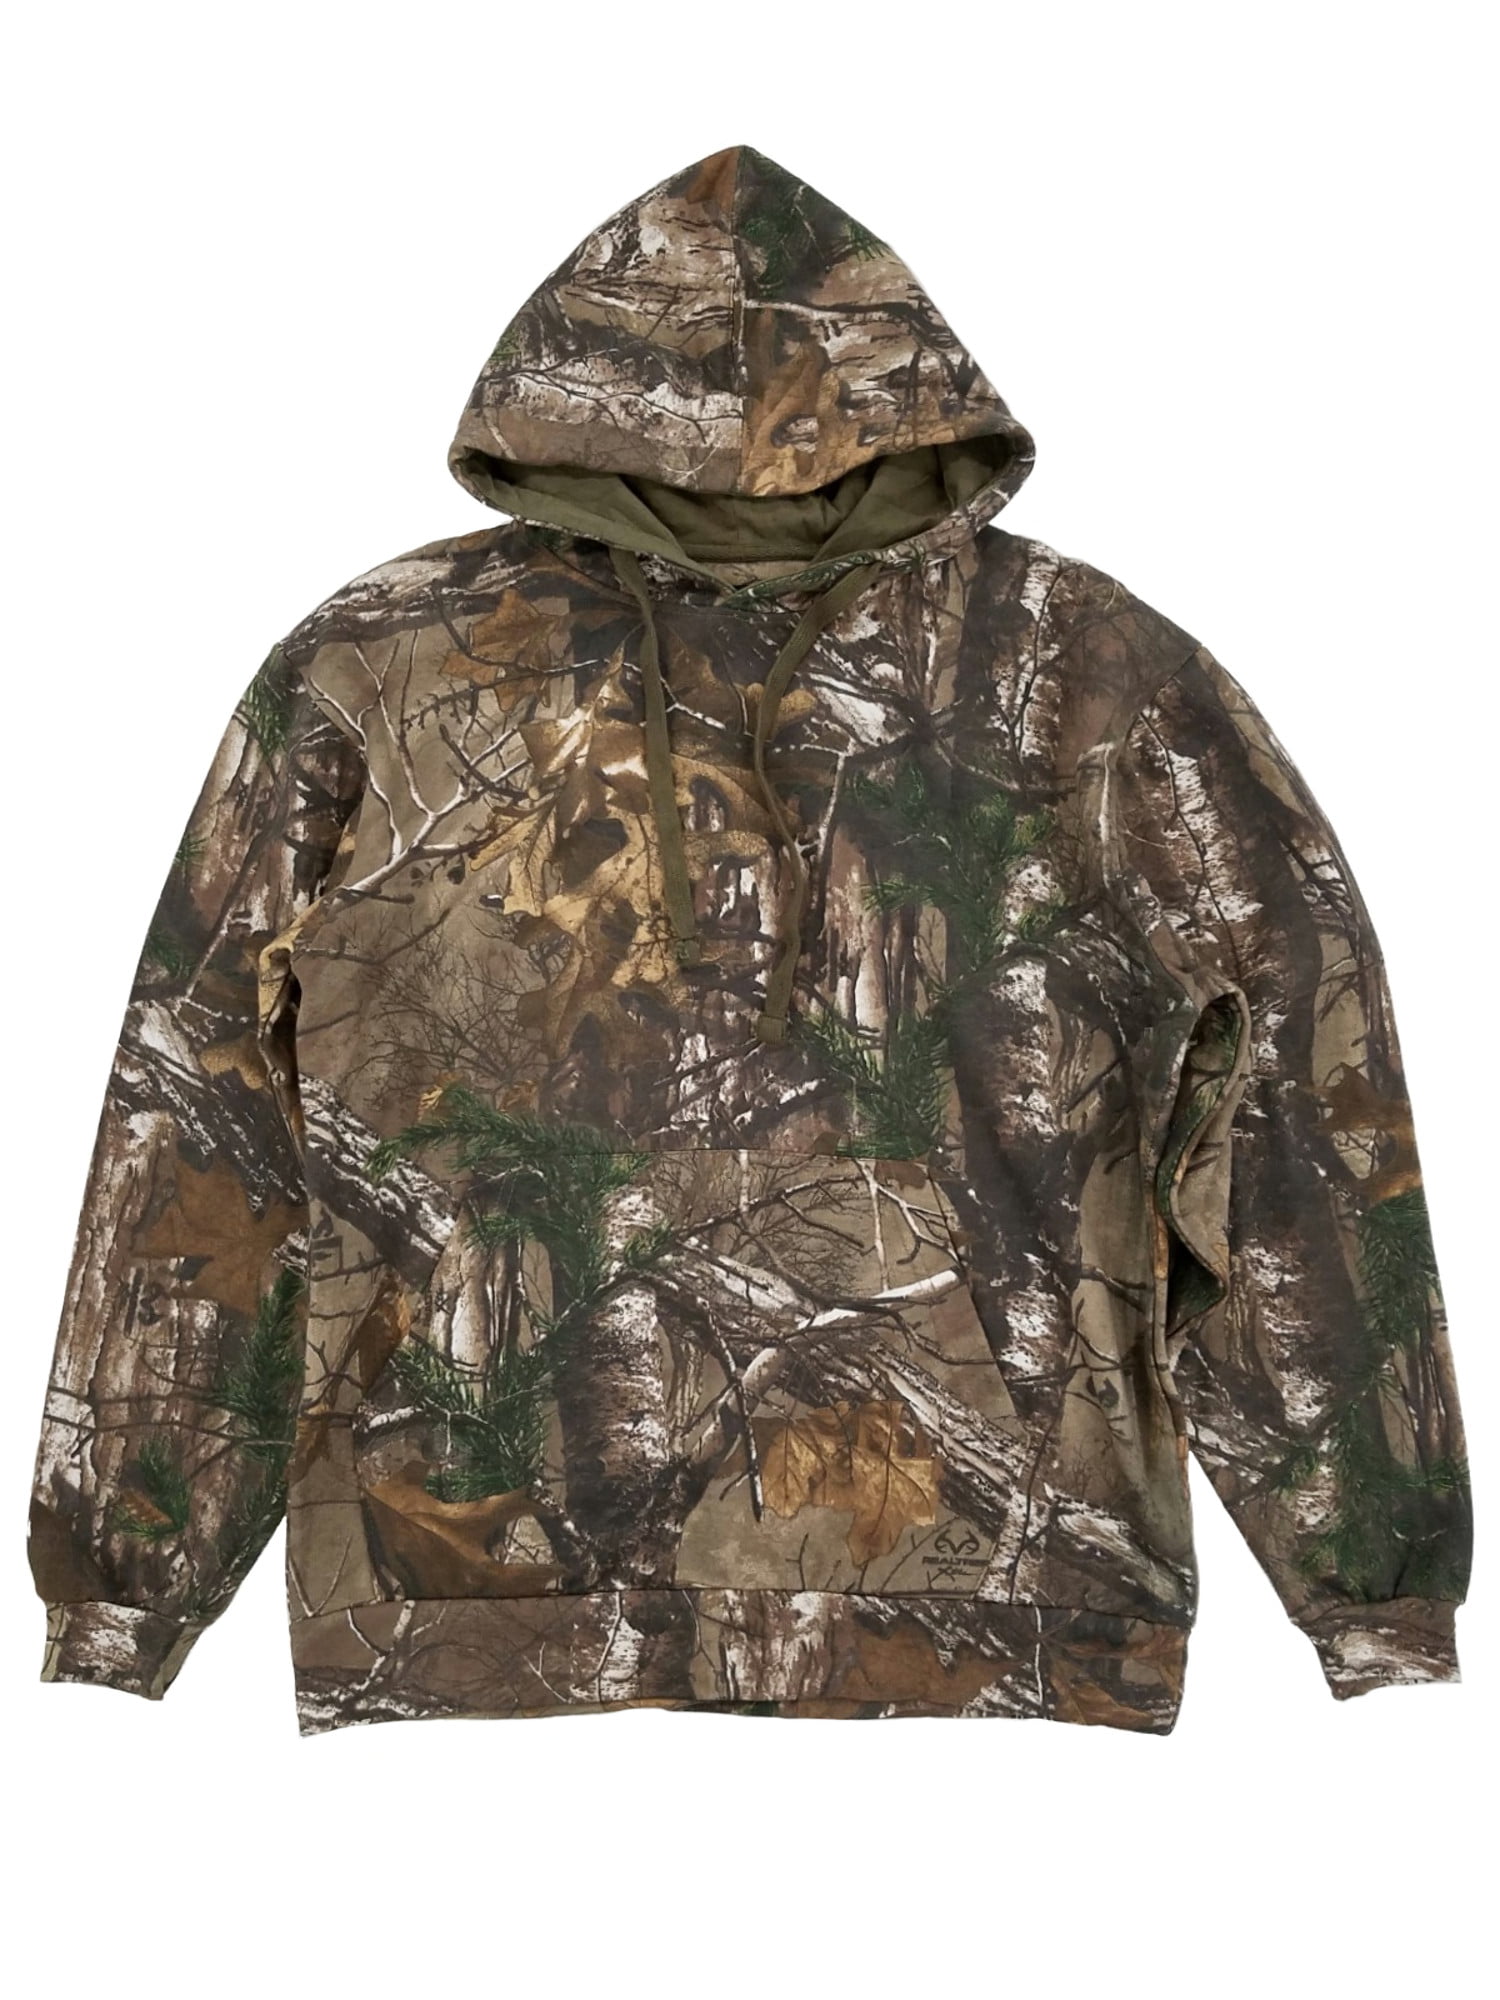 Kid's REALTREE extra Camo Hunting Camping Fishing Pullover Hoodie 